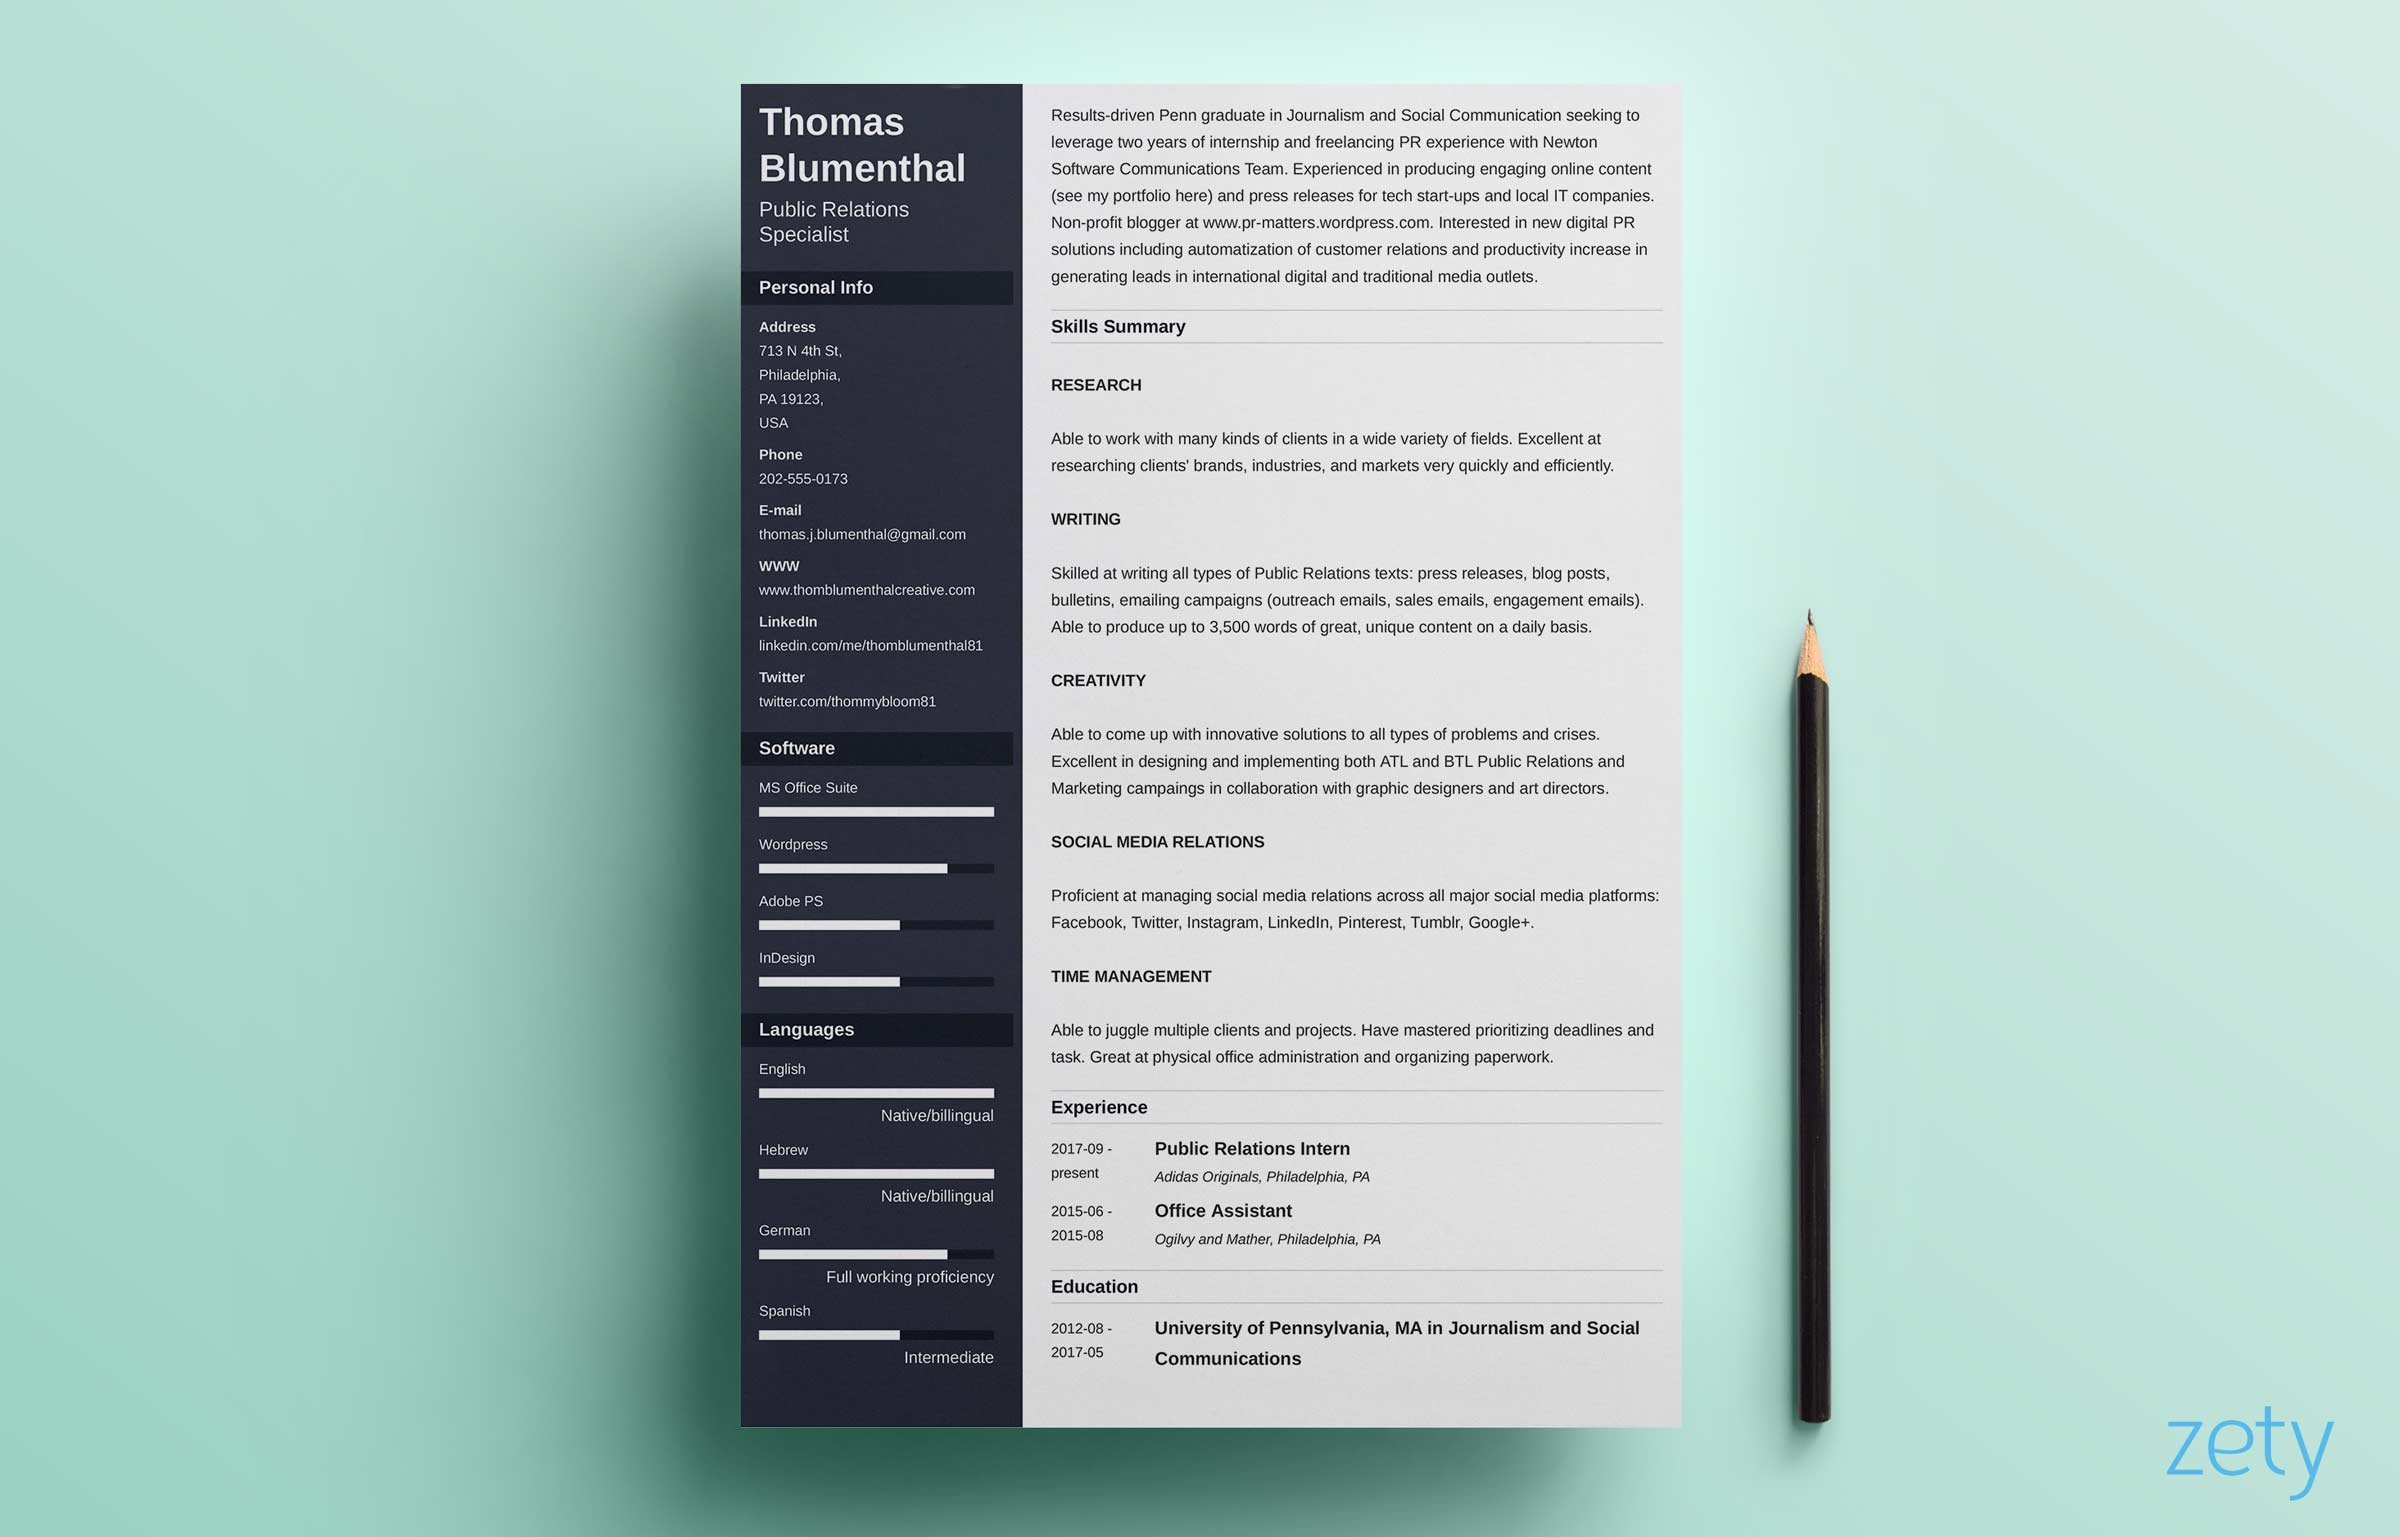 Resume Samples that Emphasize Work Skills Functional Resume: Examples & Skills Based Templates